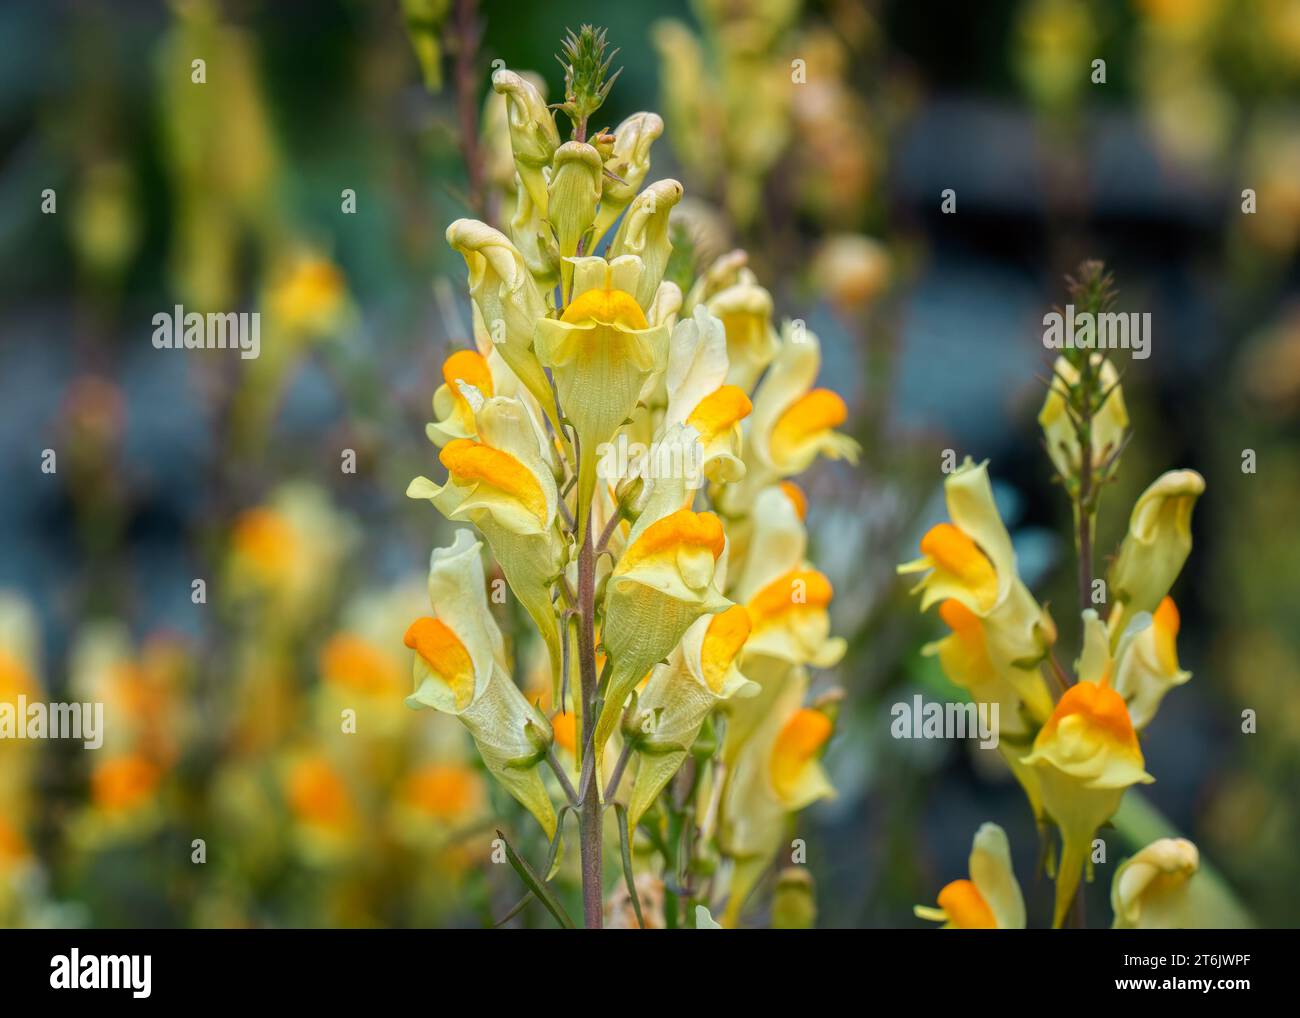 Close up of Butter and Eggs (Linaria vulgaris) yellow and orange wildflower blossoms growing in the Chippewa National Forest, northern Minnesota USA Stock Photo